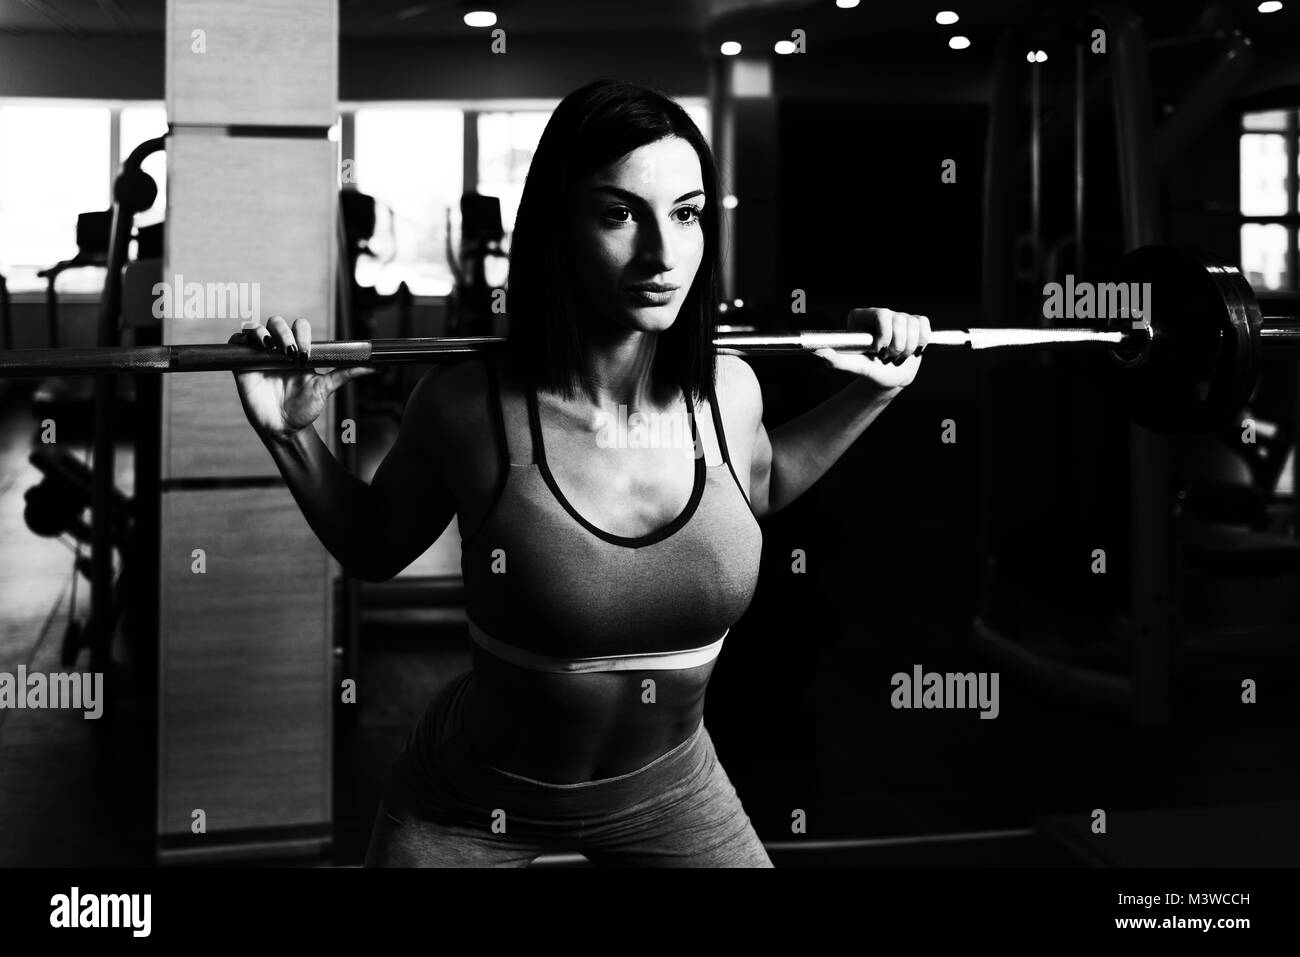 Personal trainer Black and White Stock Photos & Images - Alamy